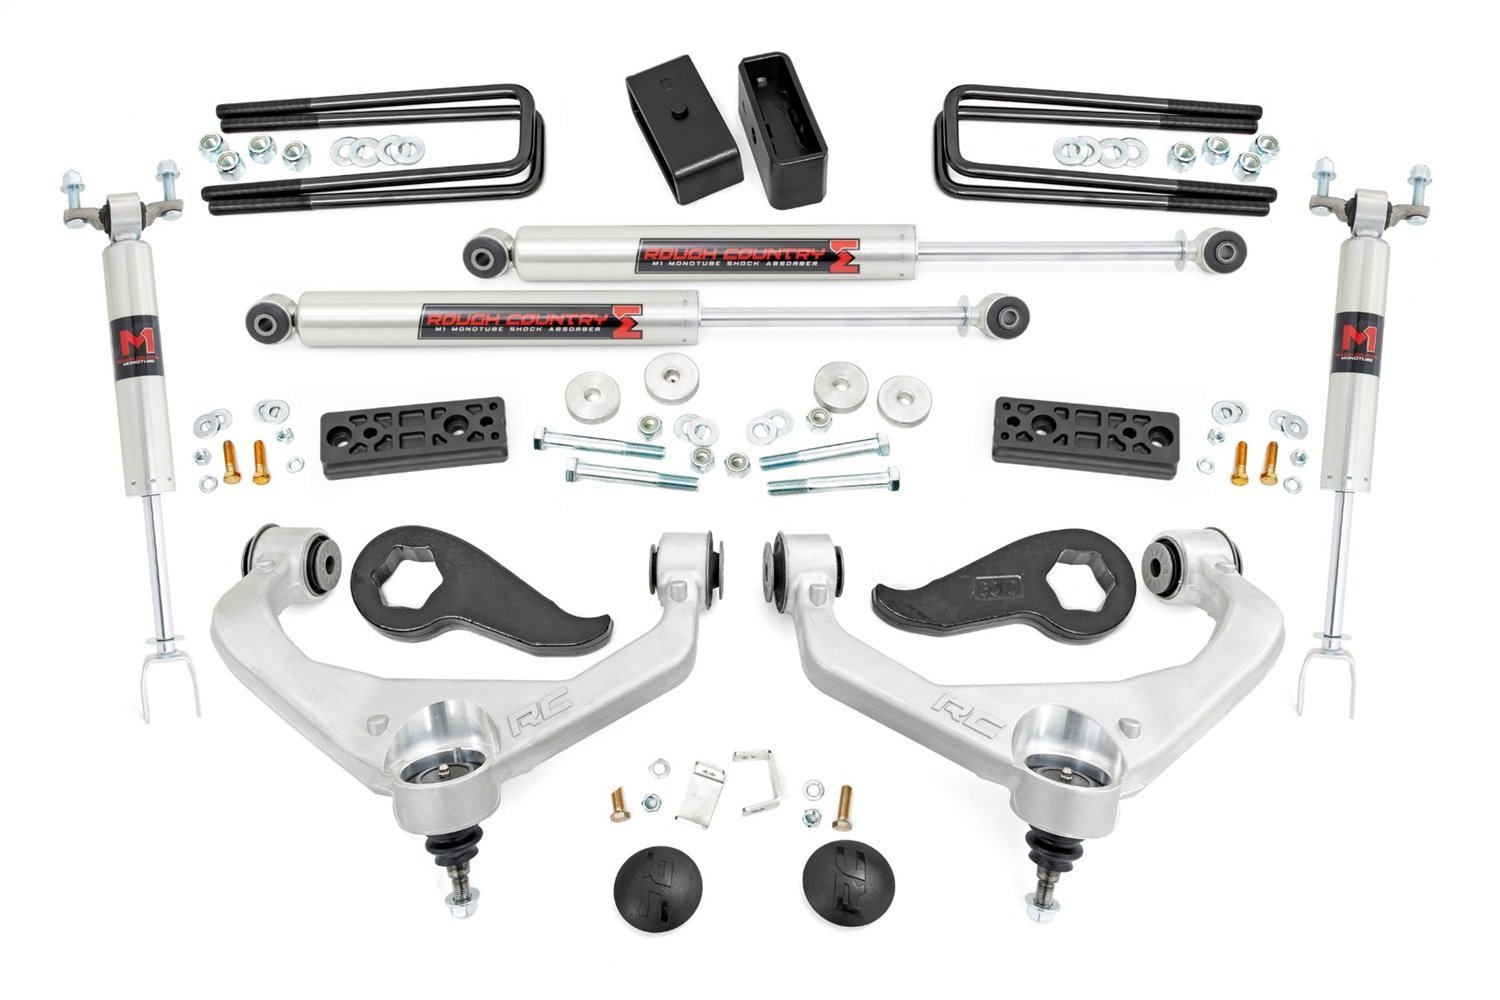 95840 3 in. Lift Kit, UCAs, M1, Fits Select Chevy/GMC 2500HD